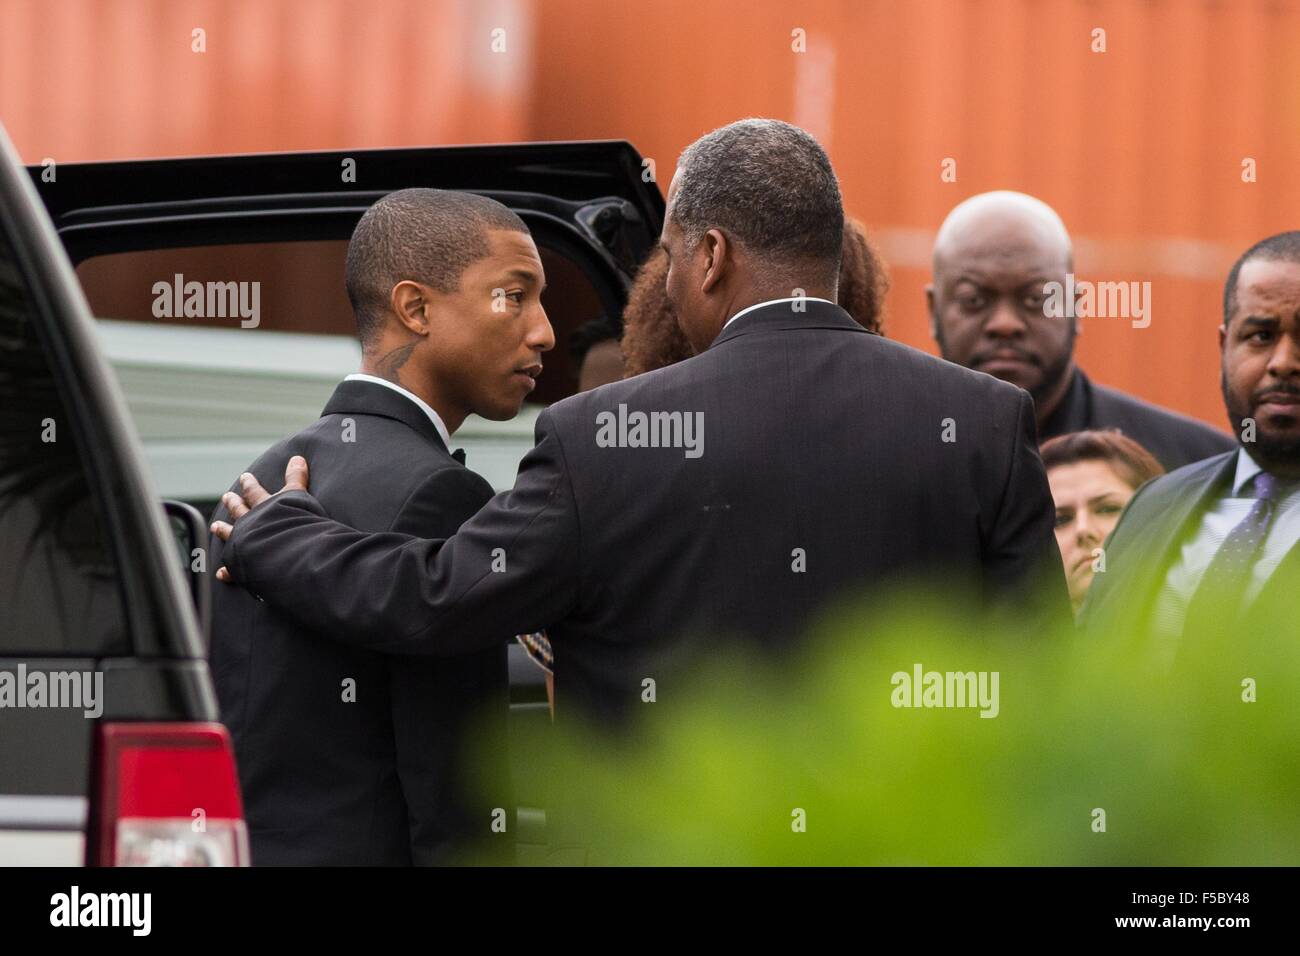 Superstar Pharrell Williams thanks family members of the Charleston 9 shooting outside the historic Mother Emanuel AME Church after performing with the Gospel Choir during Sunday service November 1, 2015 in Charleston, South Carolina. The church was the site of the mass shooting that killed nine-people in June 2015 and will be featuredais part of a program on race relations being produced by A+E Networks. Stock Photo